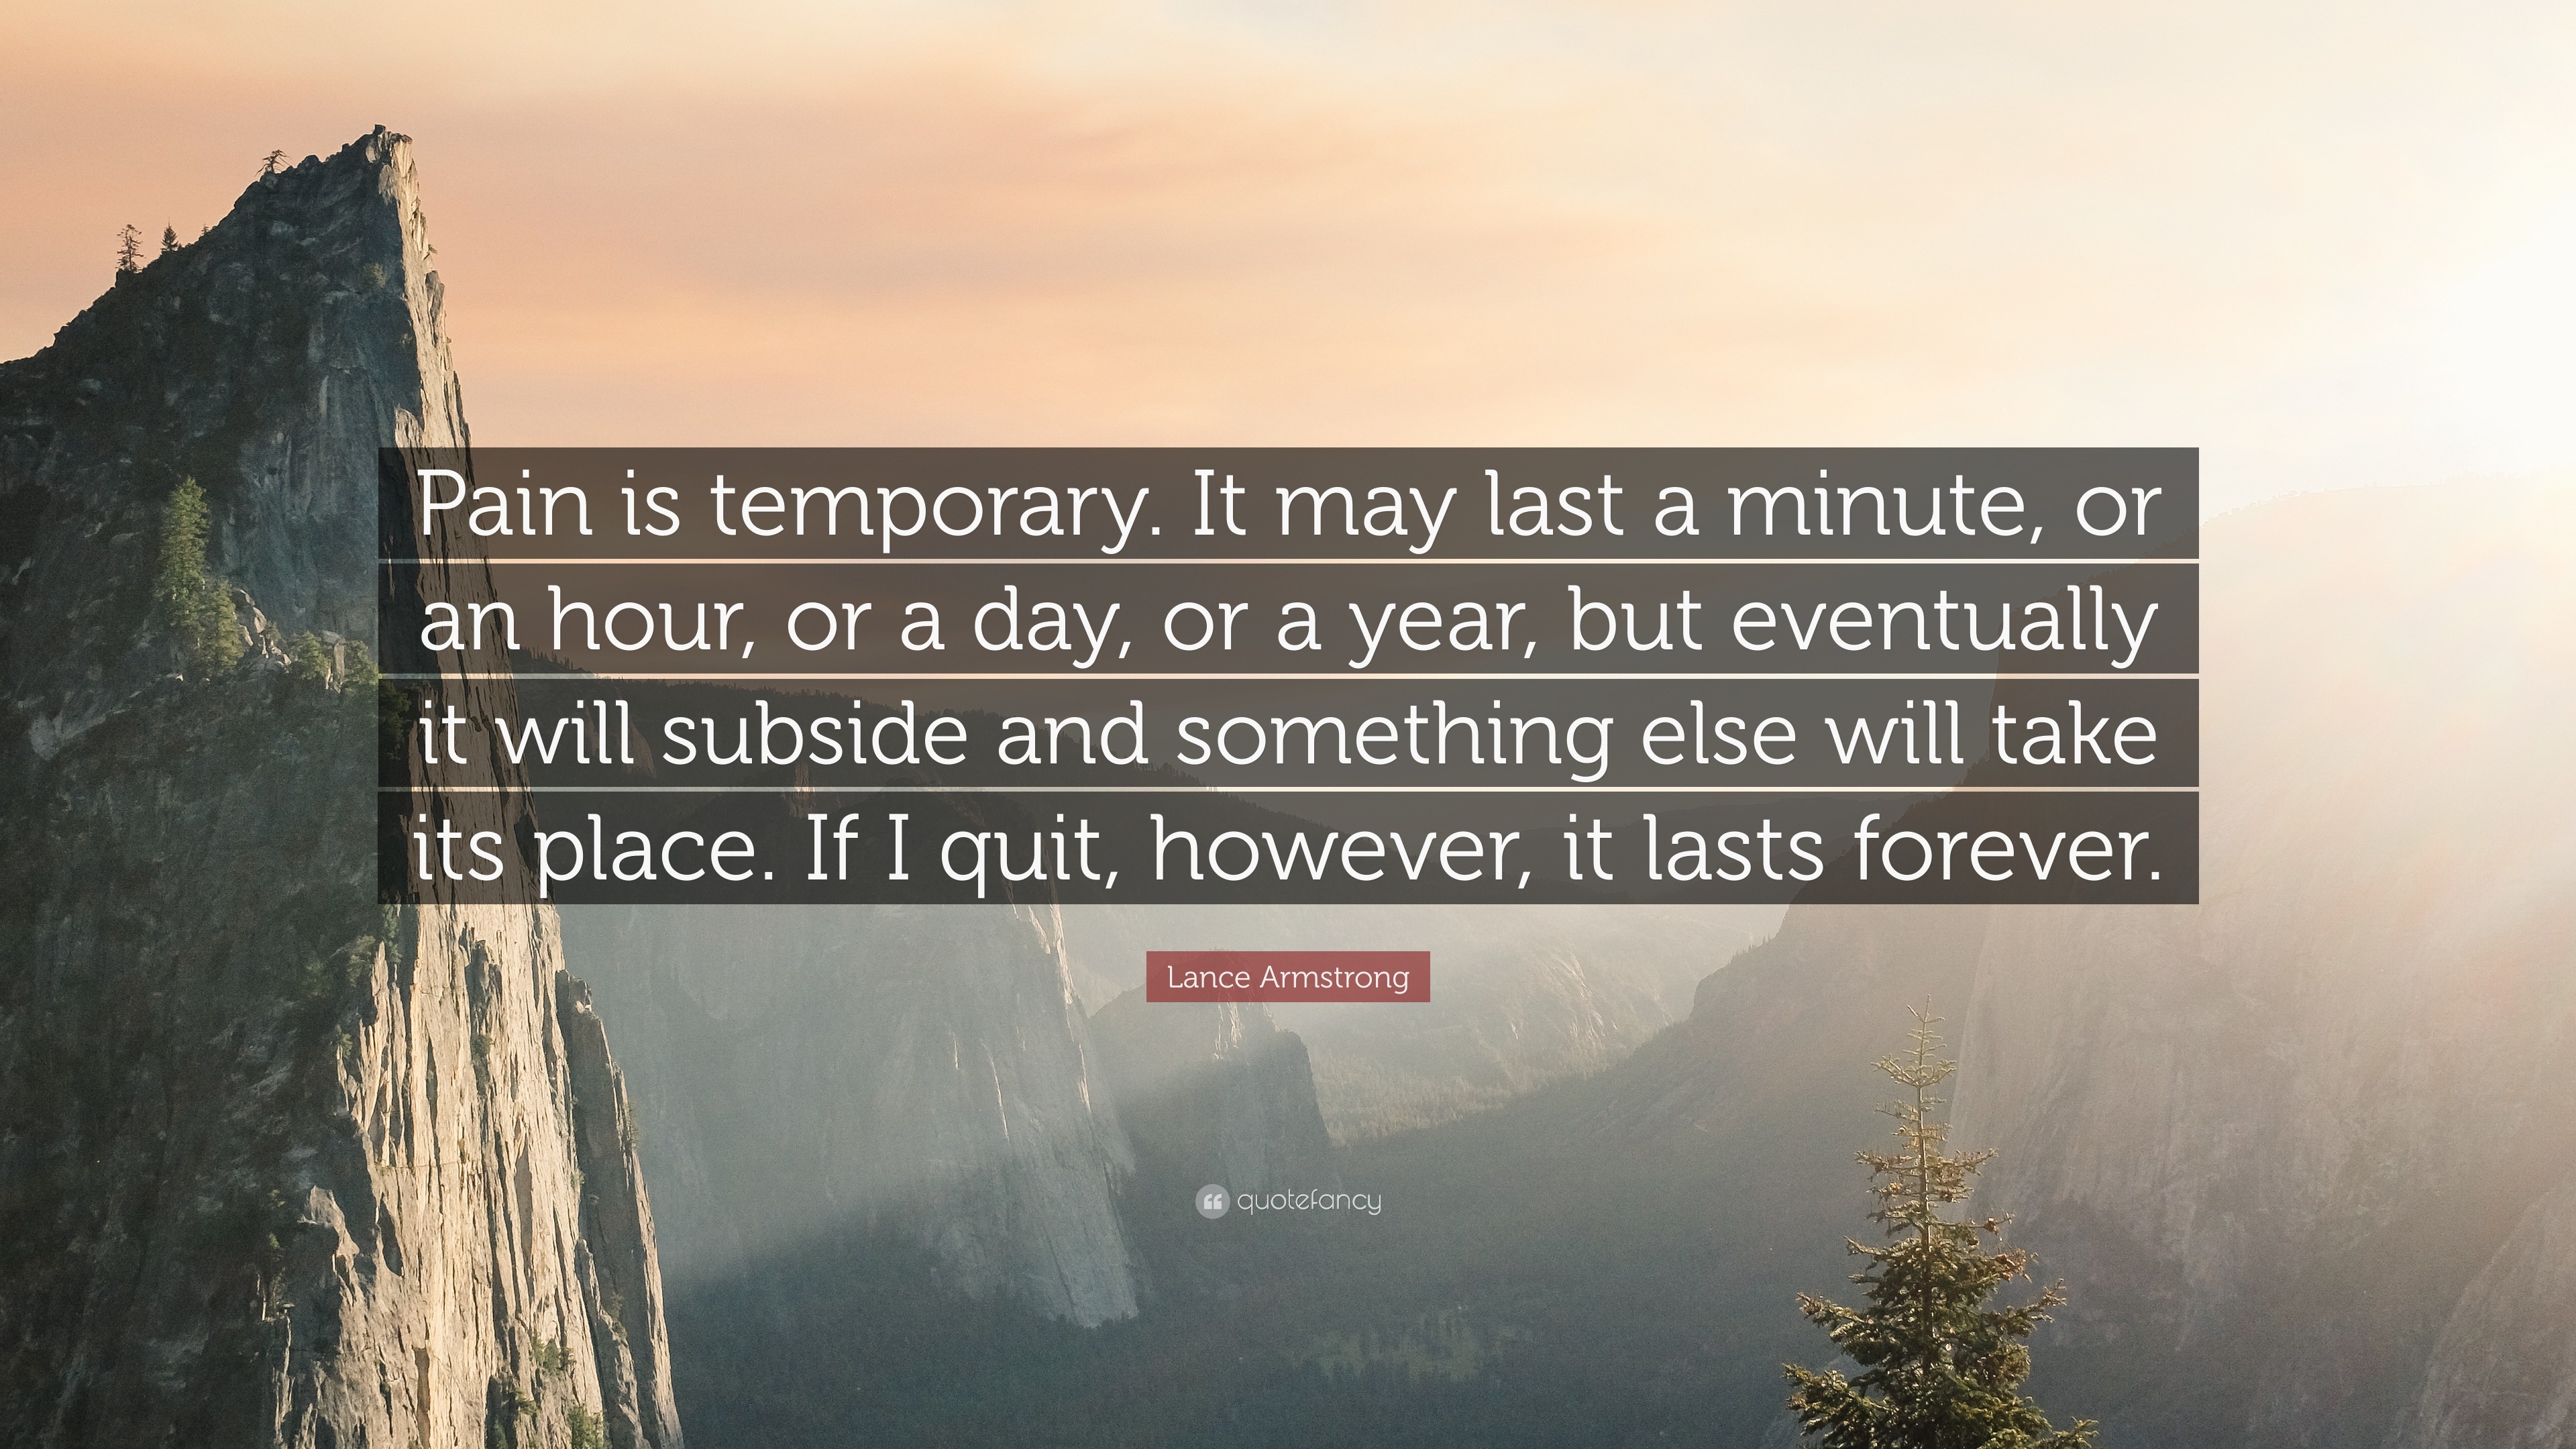 Lance Armstrong Quote: “Pain is temporary. It may last a minute, or an